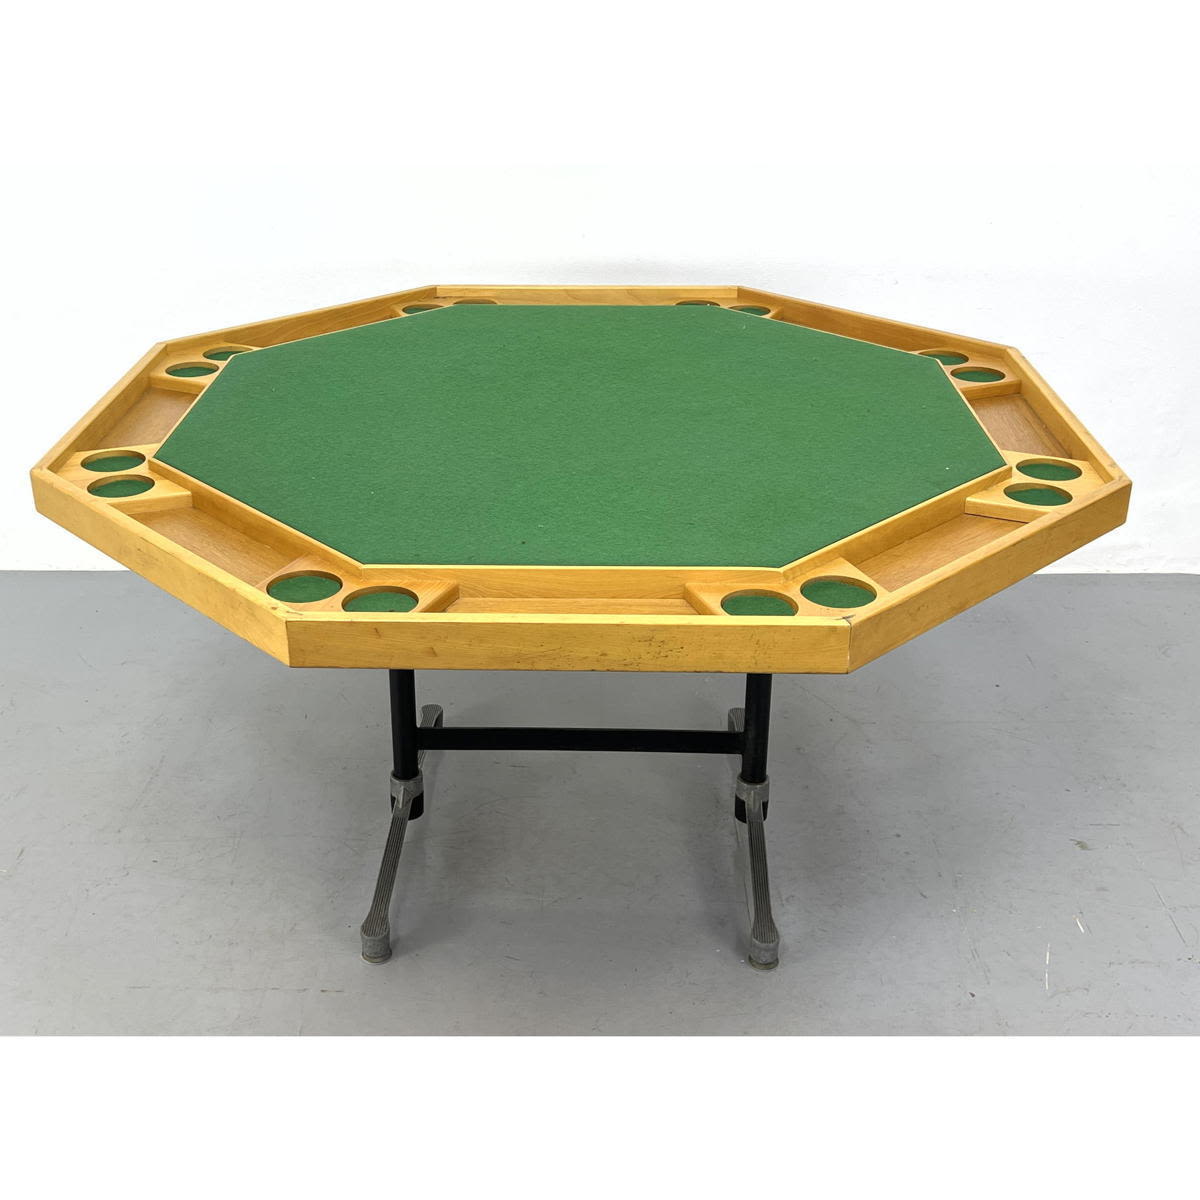 Octagonal Game Table Blond Wood 2a780e